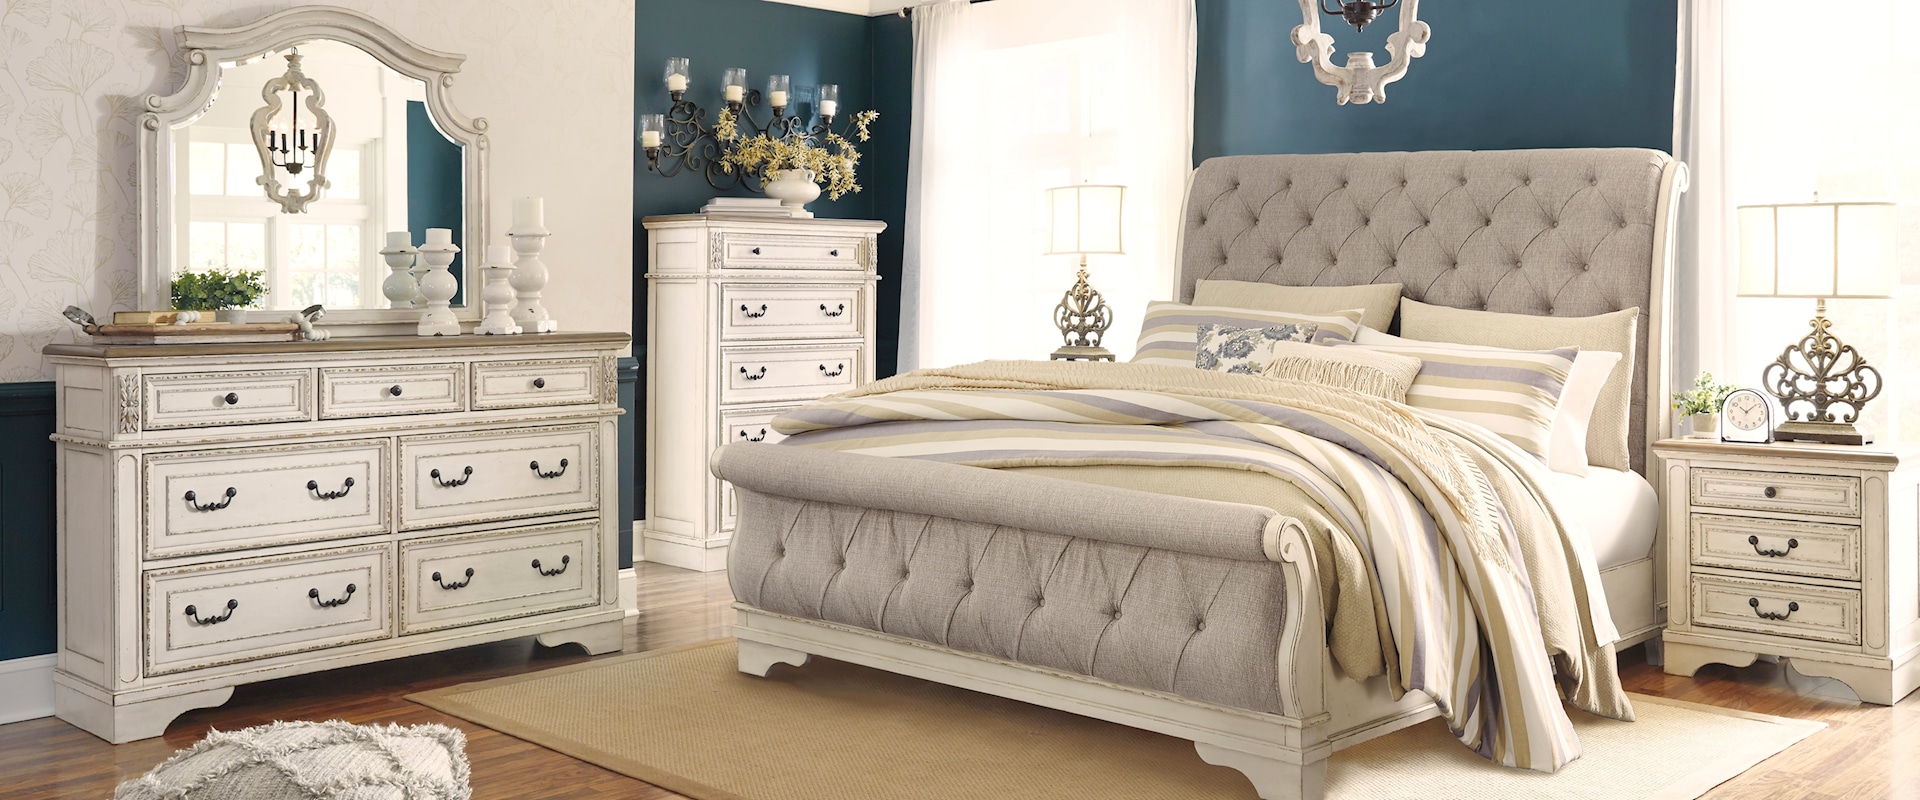 Queen Upholstered Sleigh Bed, Dresser, Mirror, Nightstand and Chest